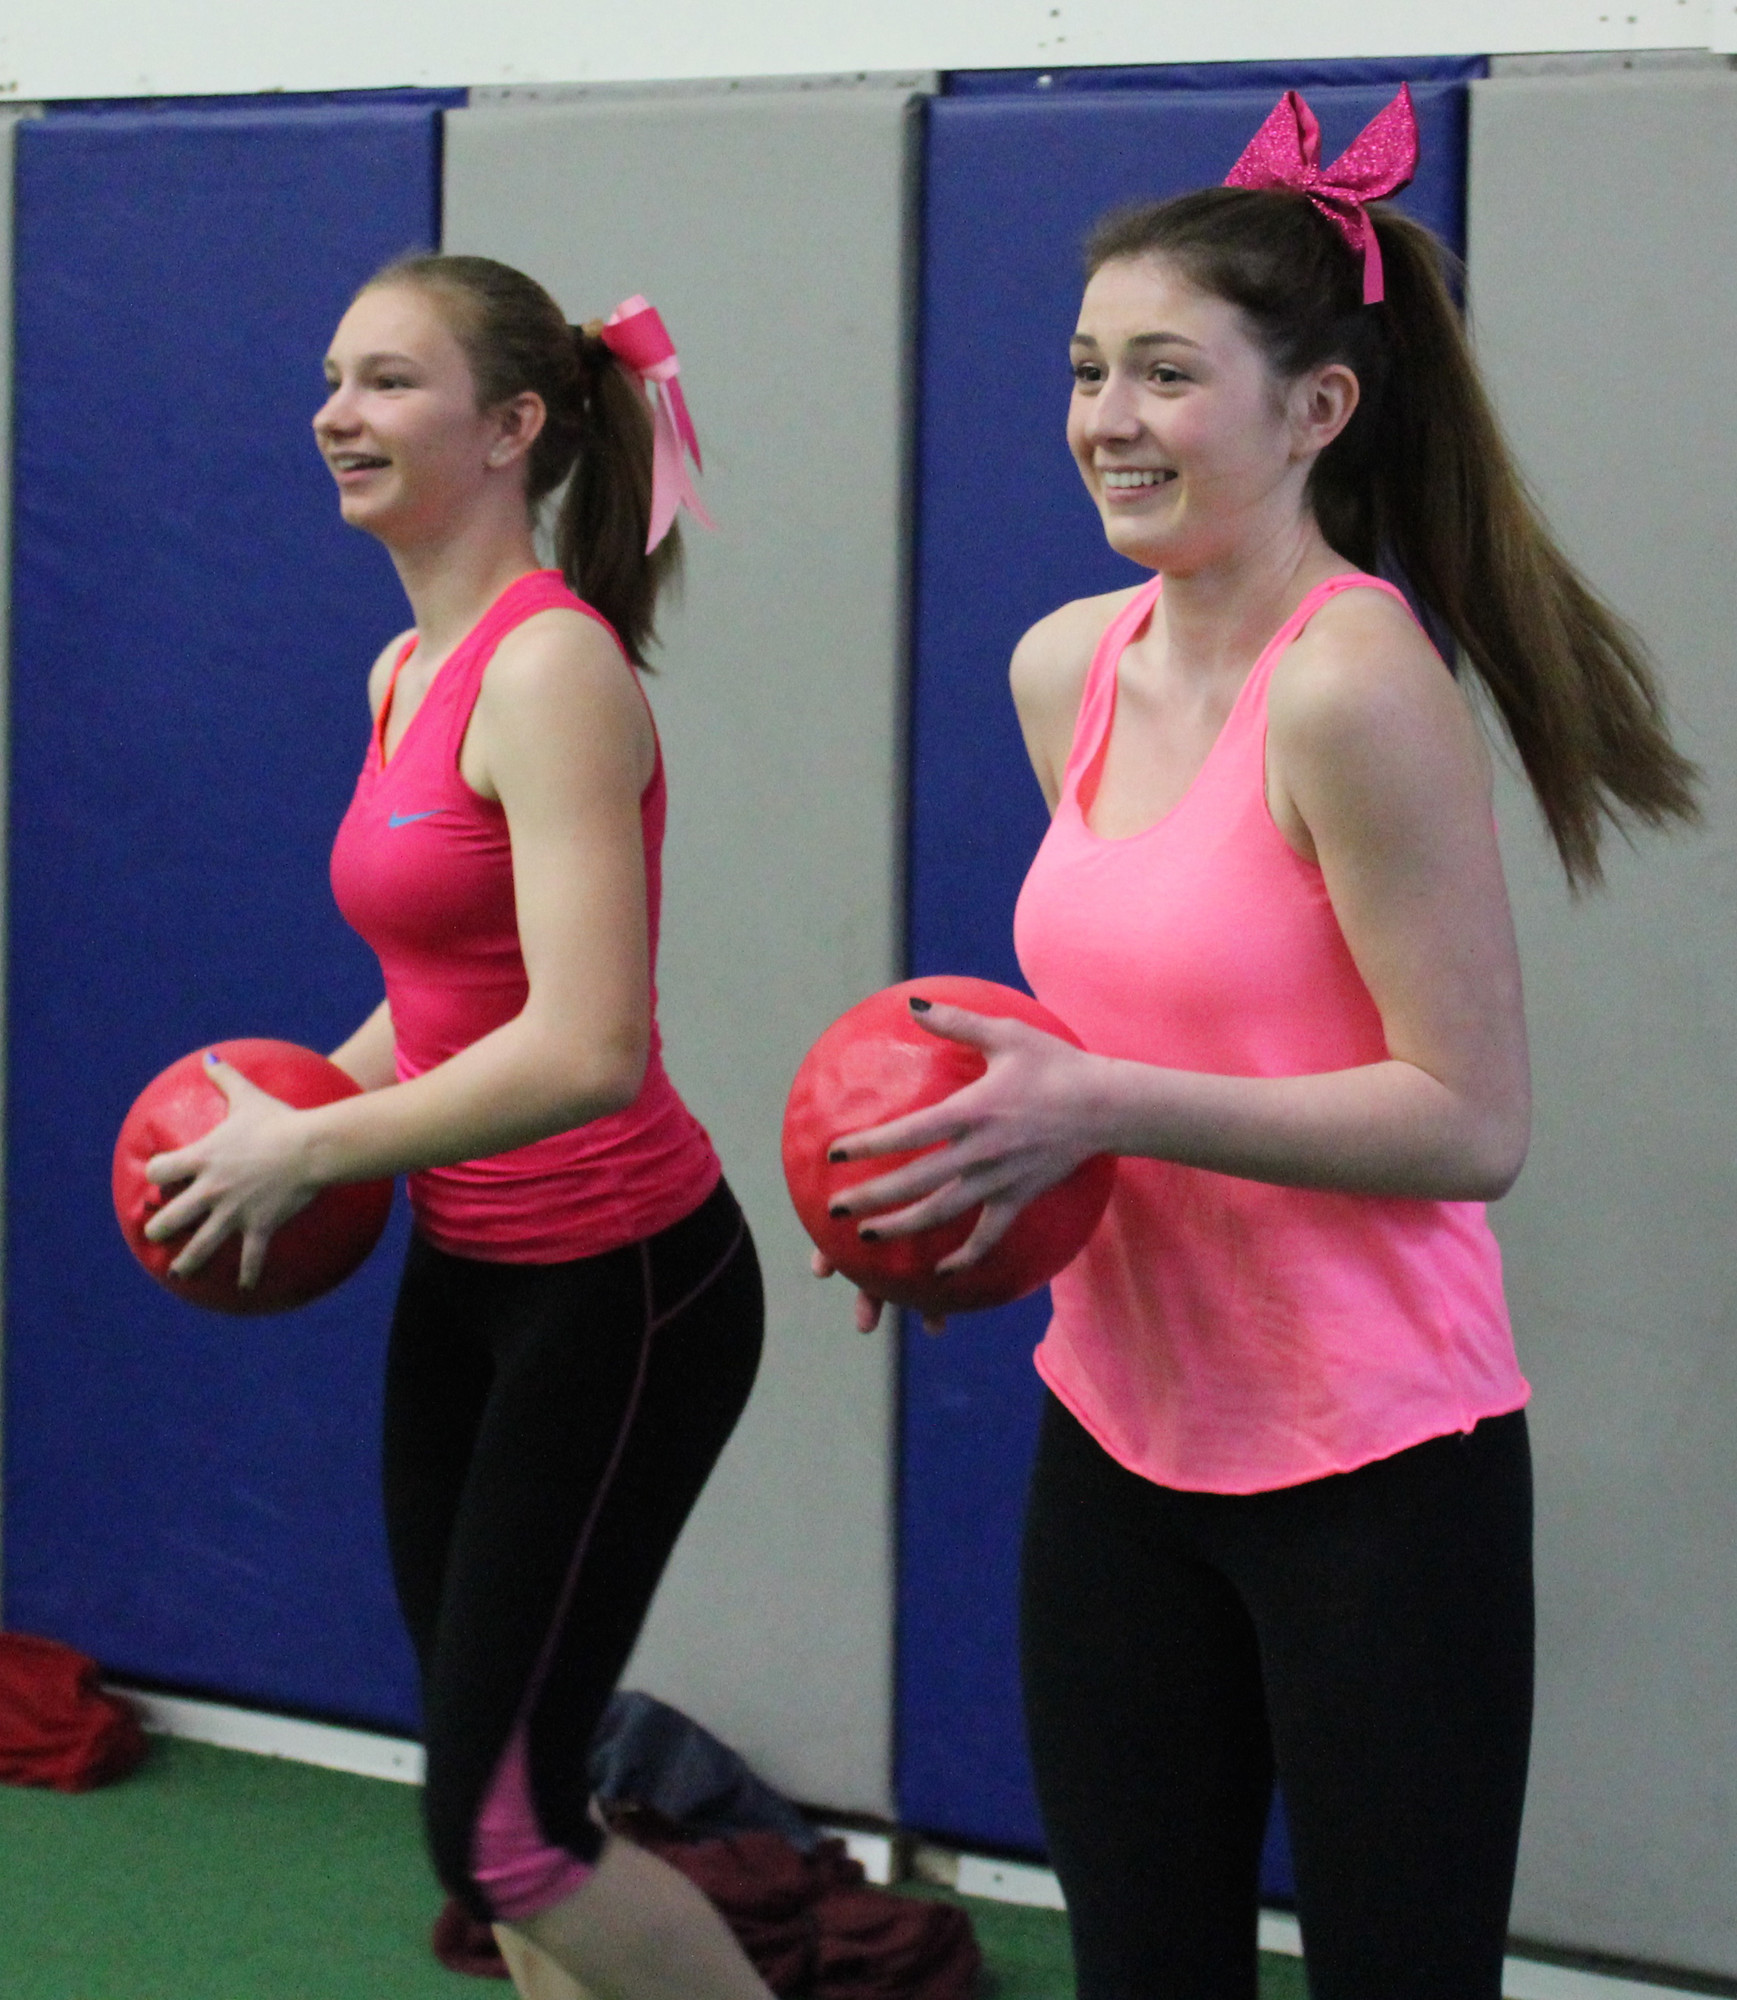 Emma Vecchione and Lane McKenna played for the pink team.